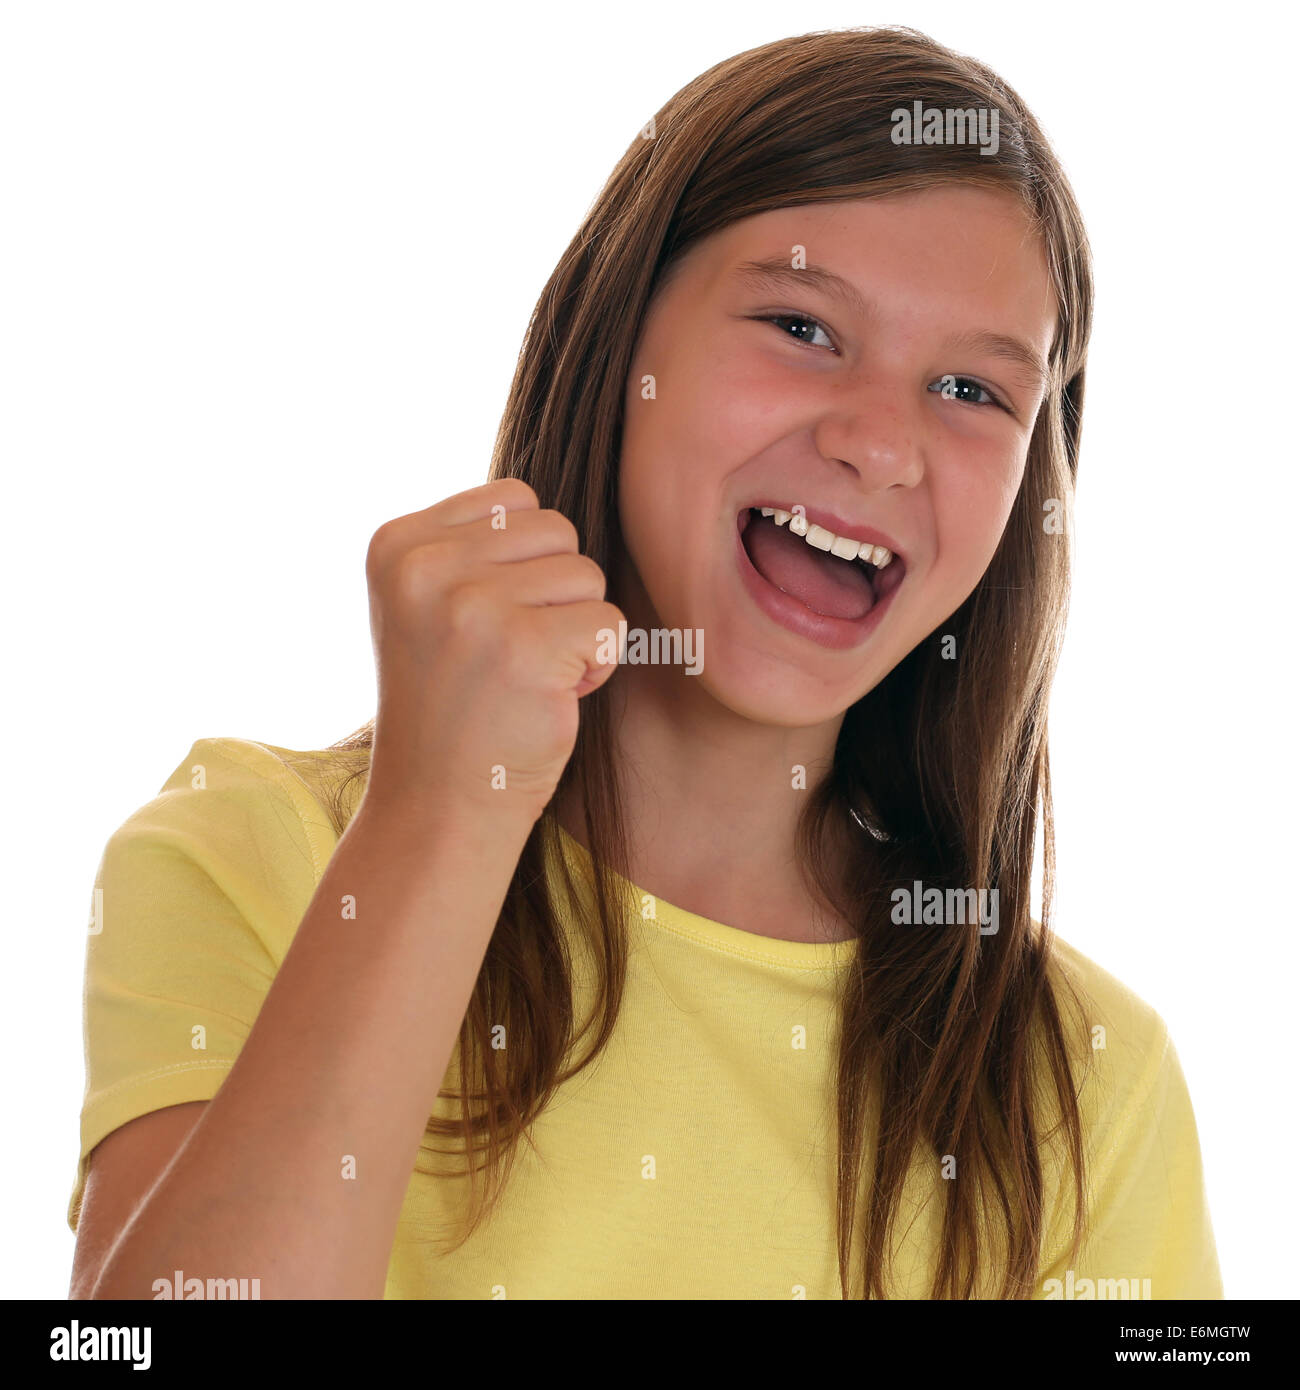 Successful girl clenching fist when winning, isolated on a white background Stock Photo